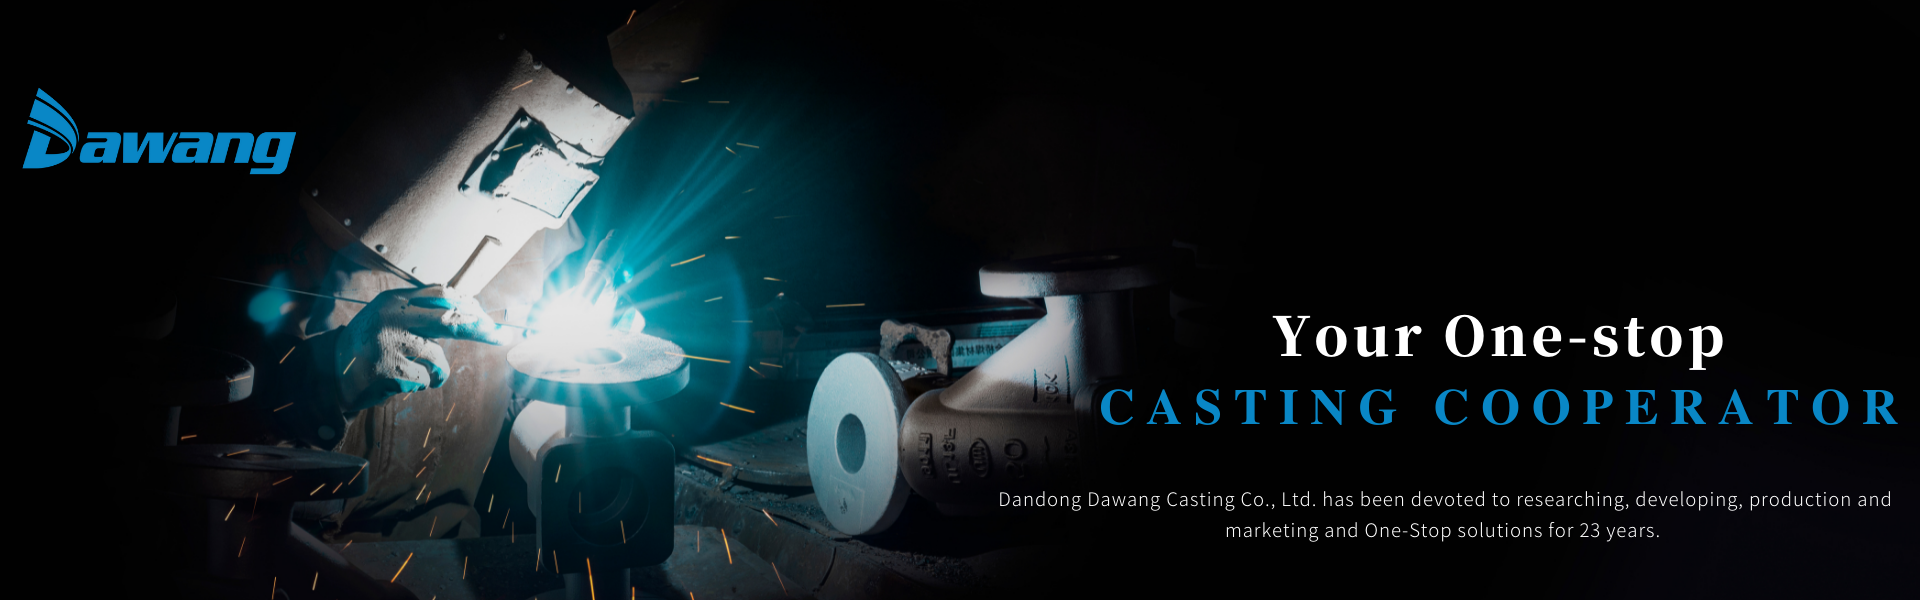 Steel casting components